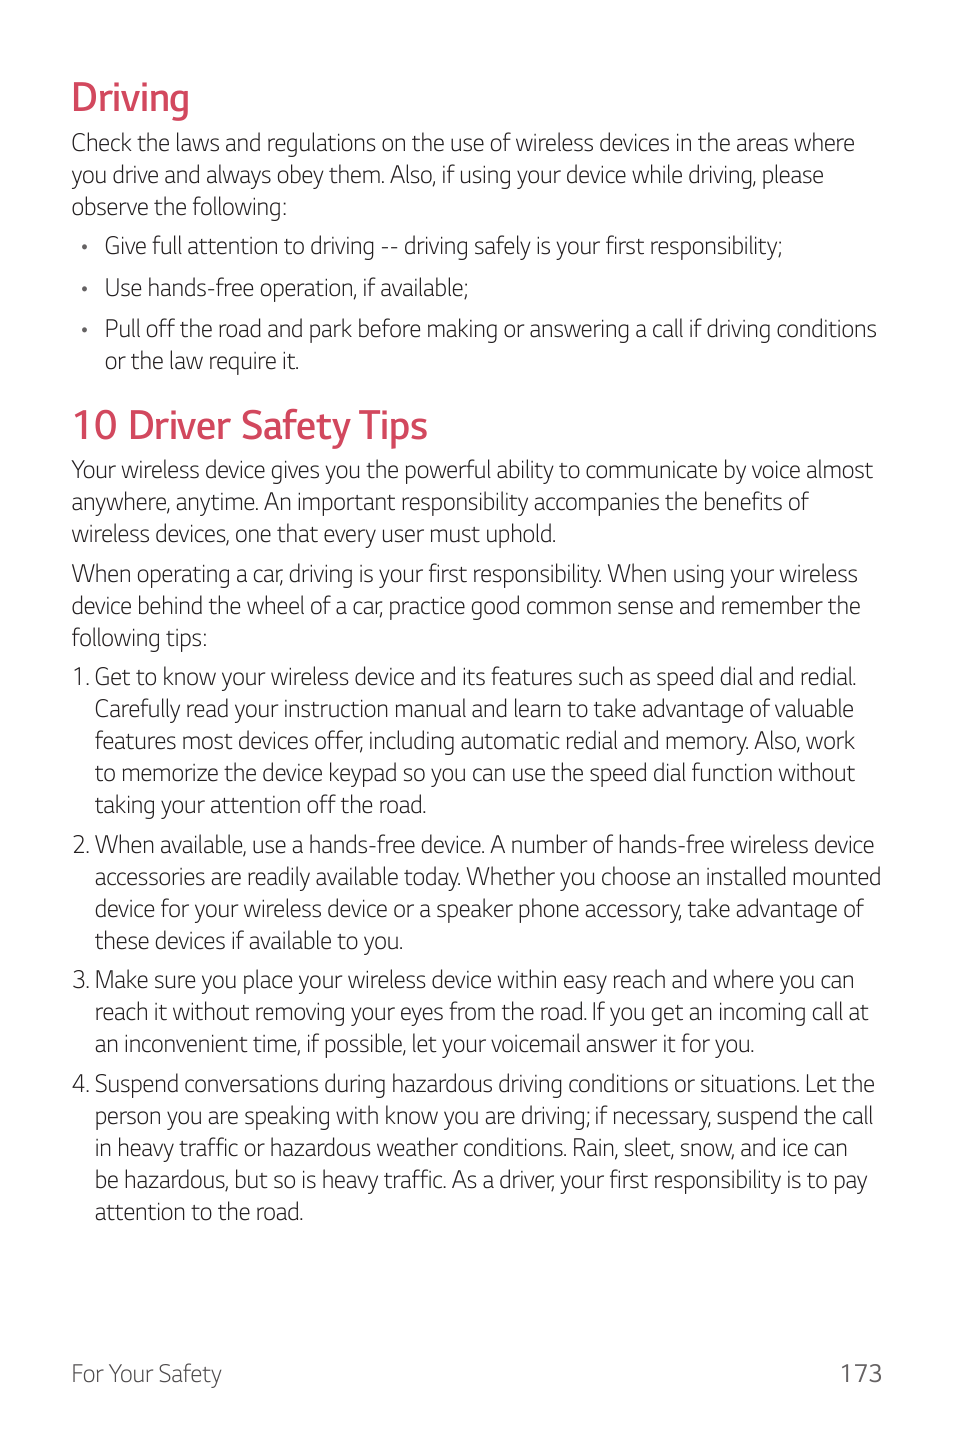 Driving, 10 driver safety tips | LG G6 H872 User Manual | Page 174 / 183